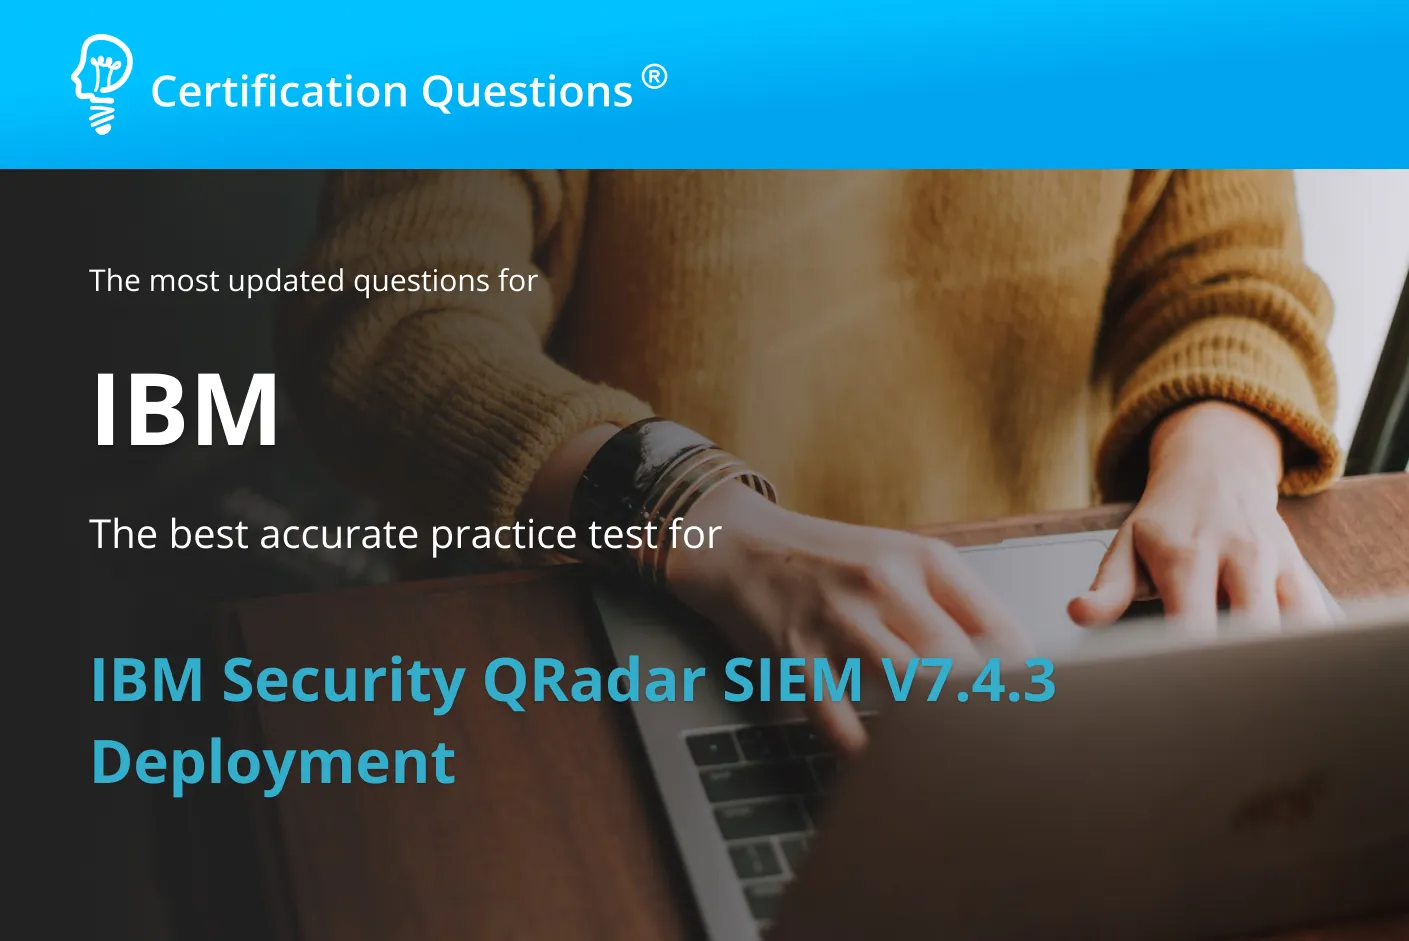 This is a study guide related to the IBM Security Qradar Siem V7 Deployment Practice Test in the United States.